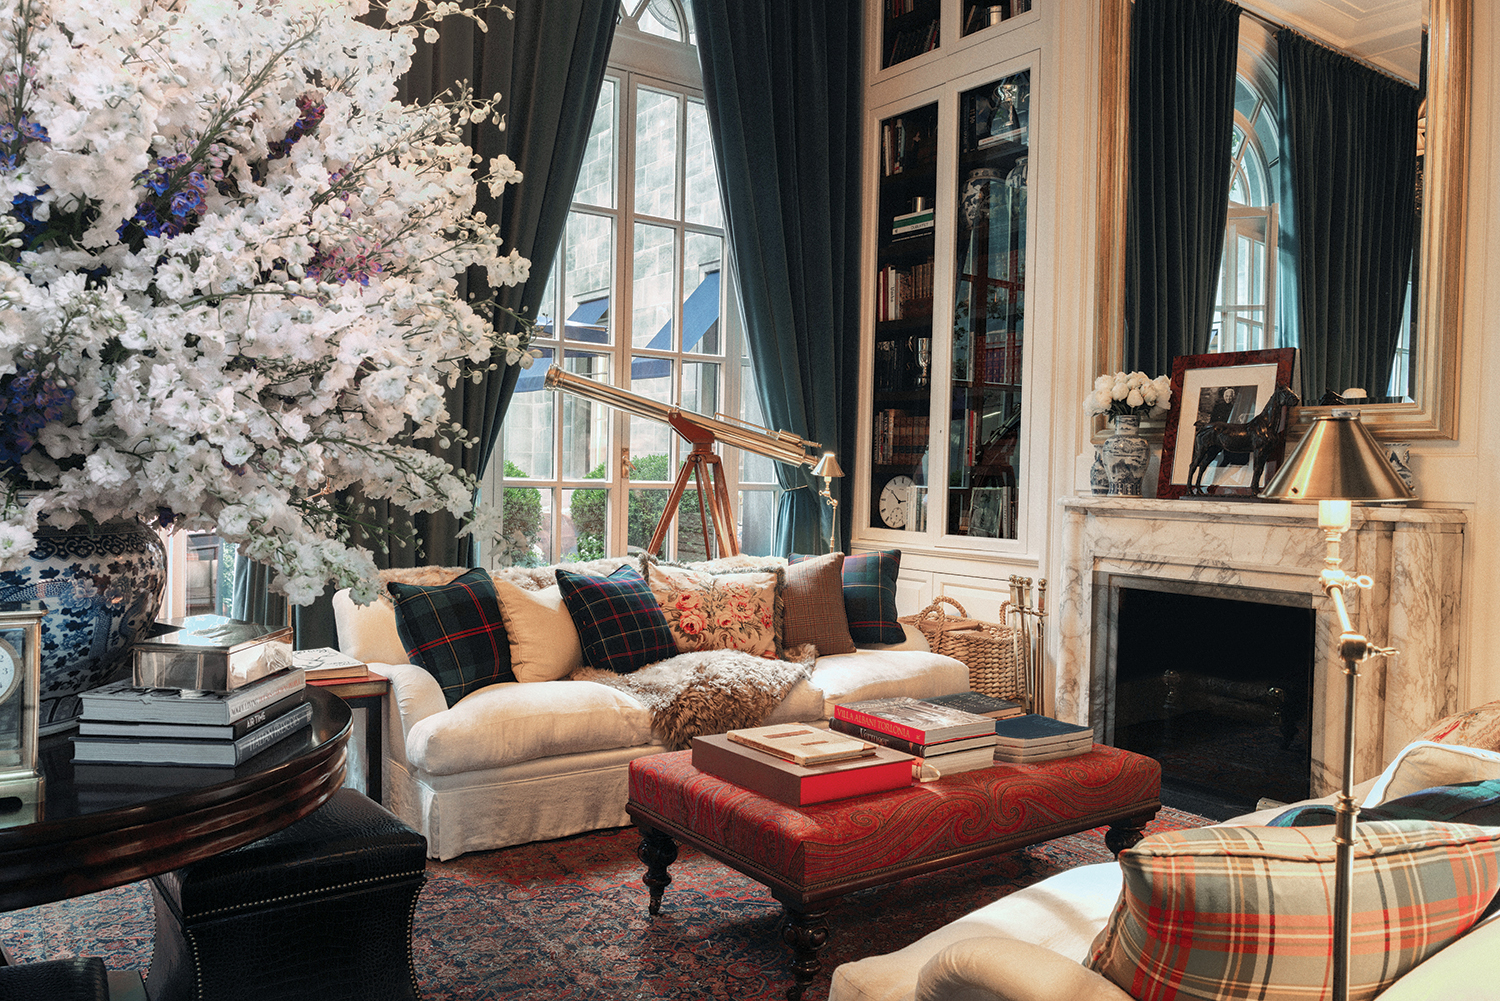 See Inside Ralph Lauren's Hospitality Suite at the U.S. Open